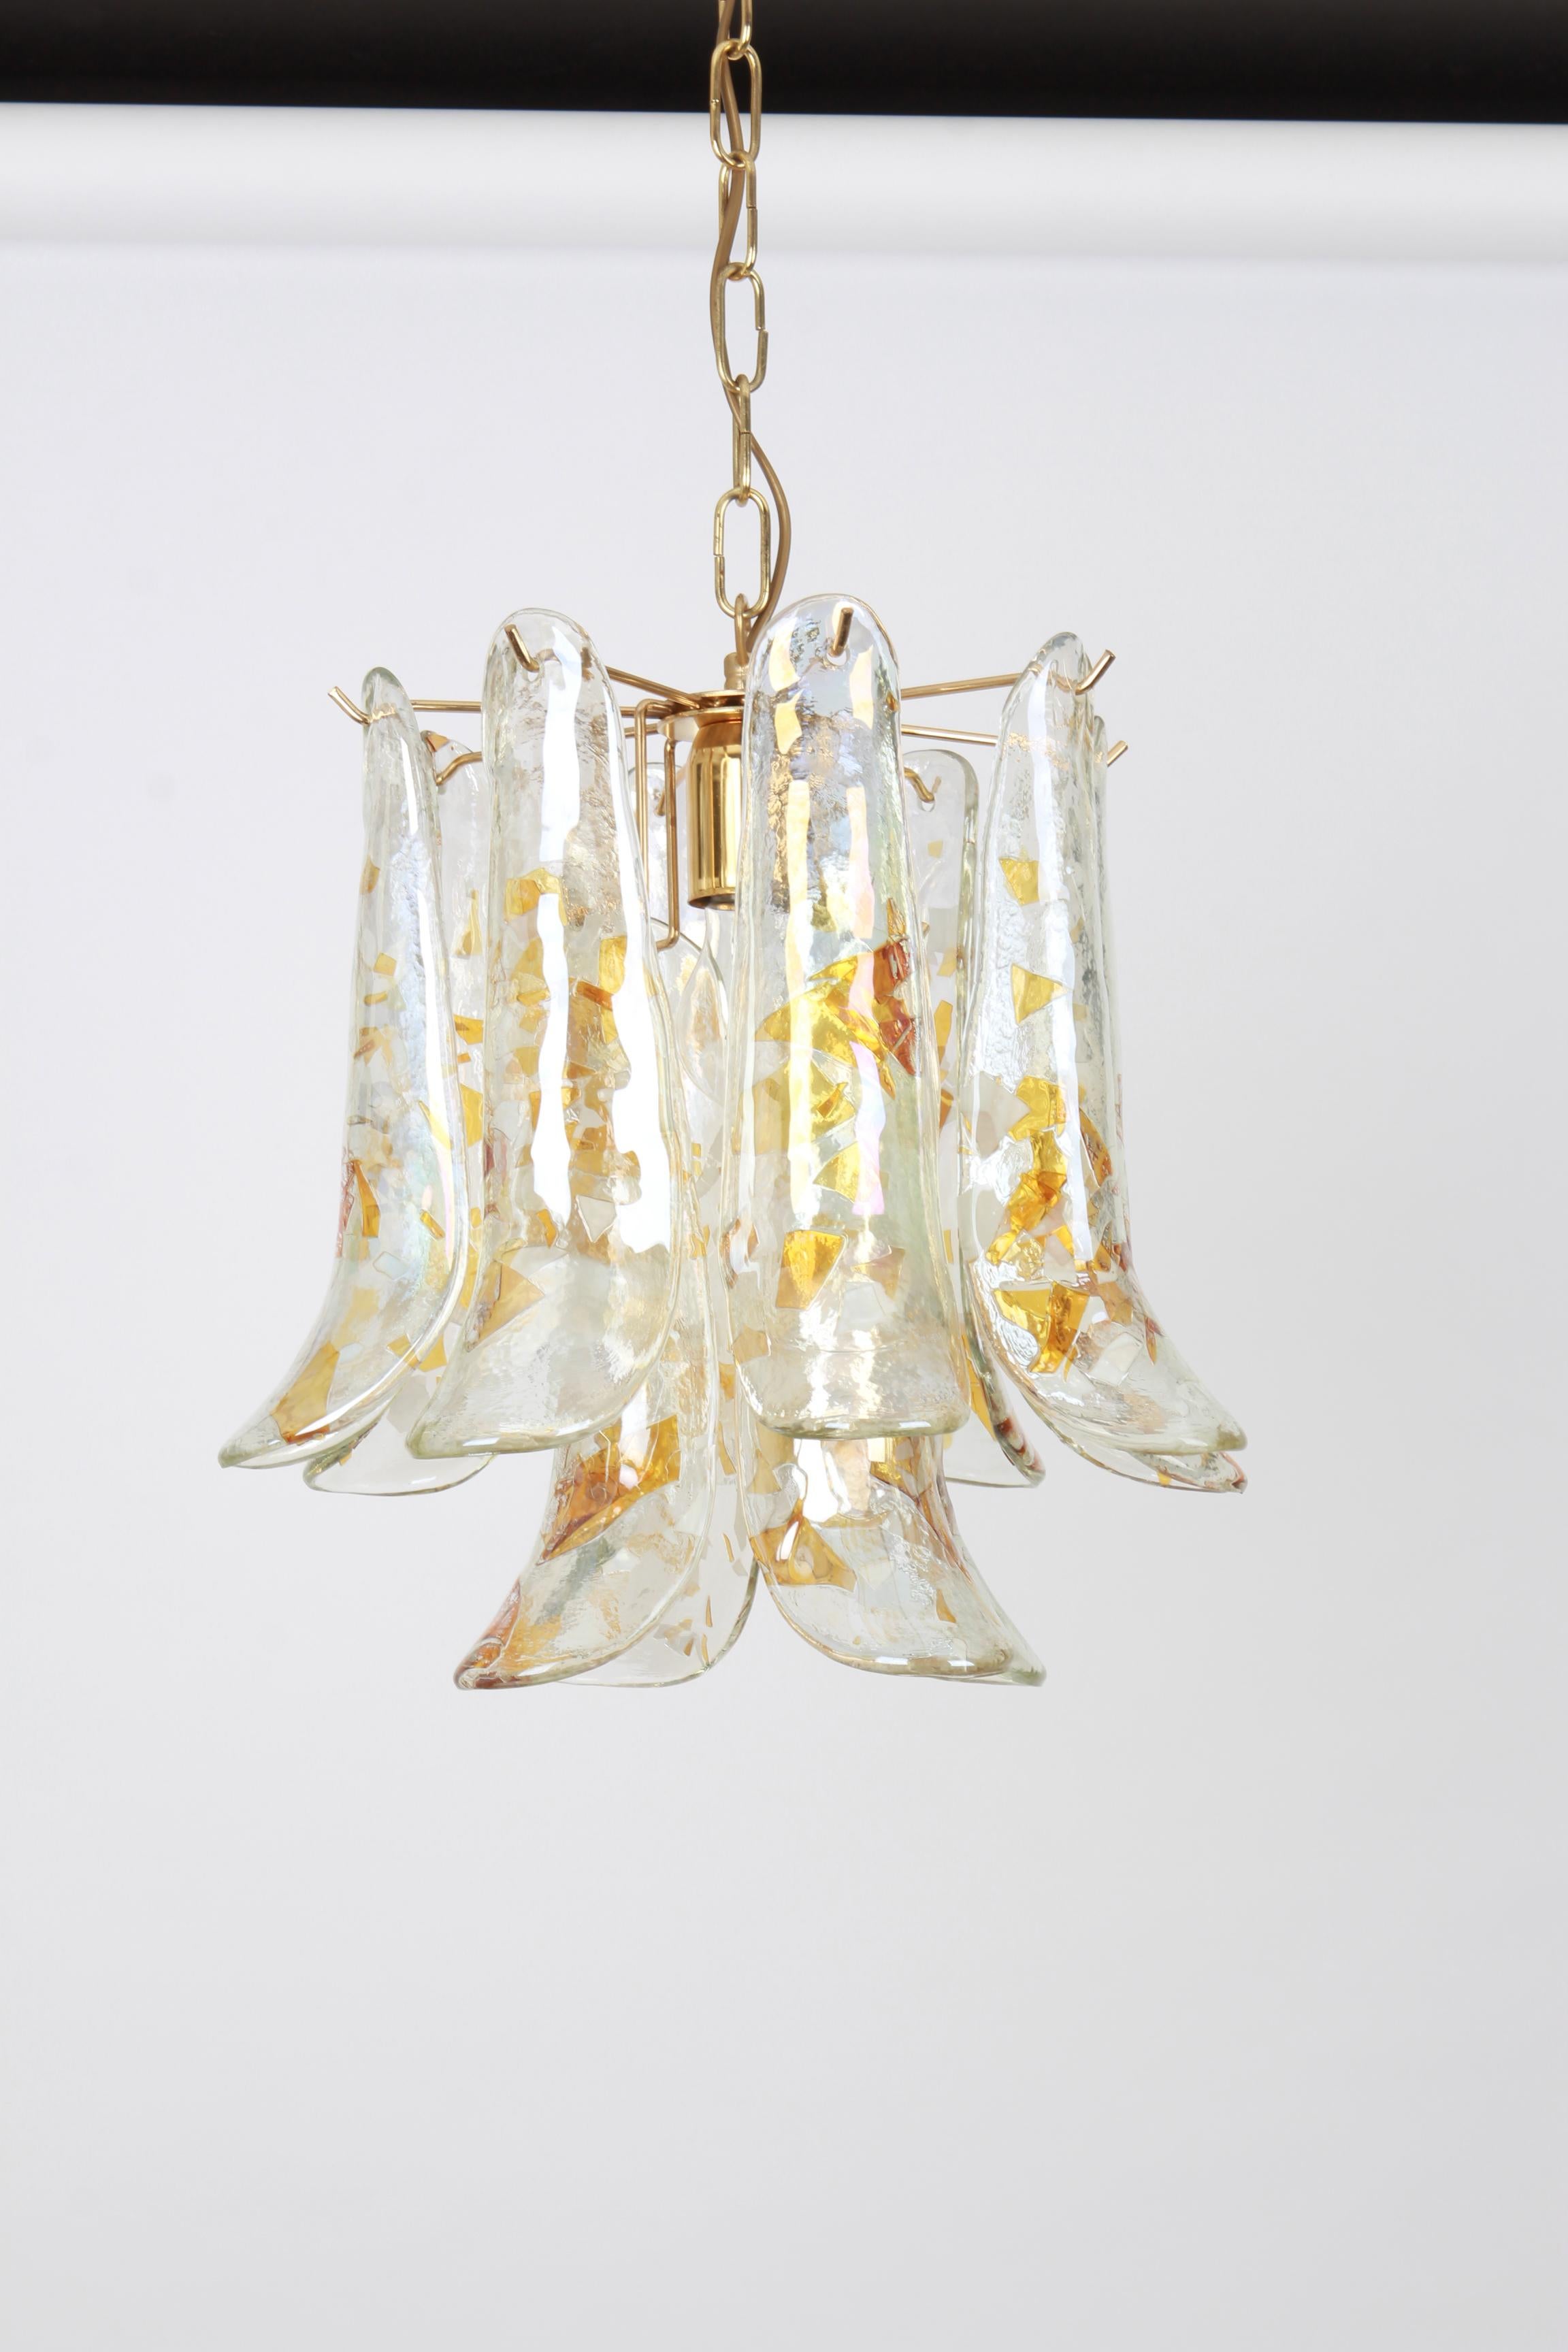 Mid-Century Modern Murano Glass Chandelier Designed by Carlo Nason for Mazzega, 1970s For Sale